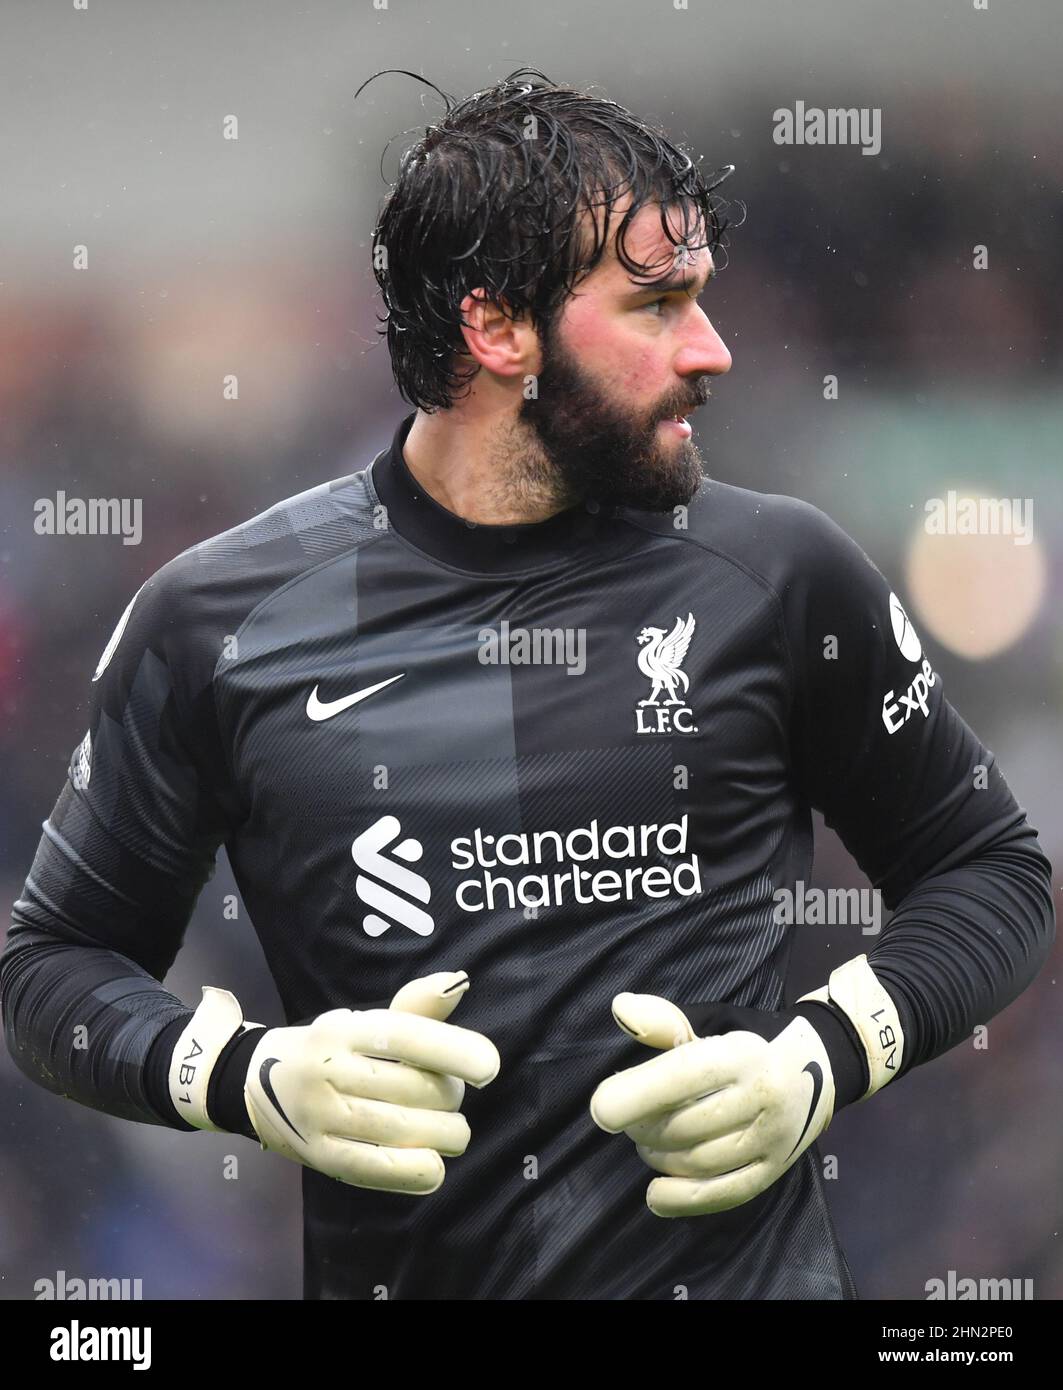 Burnley, UK. 13th Feb, 2022. Liverpool goalkeeper Alisson during the Premier League match at Turf Moor, Burnley, UK. Picture date: Sunday February 13, 2022. Photo credit should read: Anthony Devlin Credit: Anthony Devlin/Alamy Live News Stock Photo